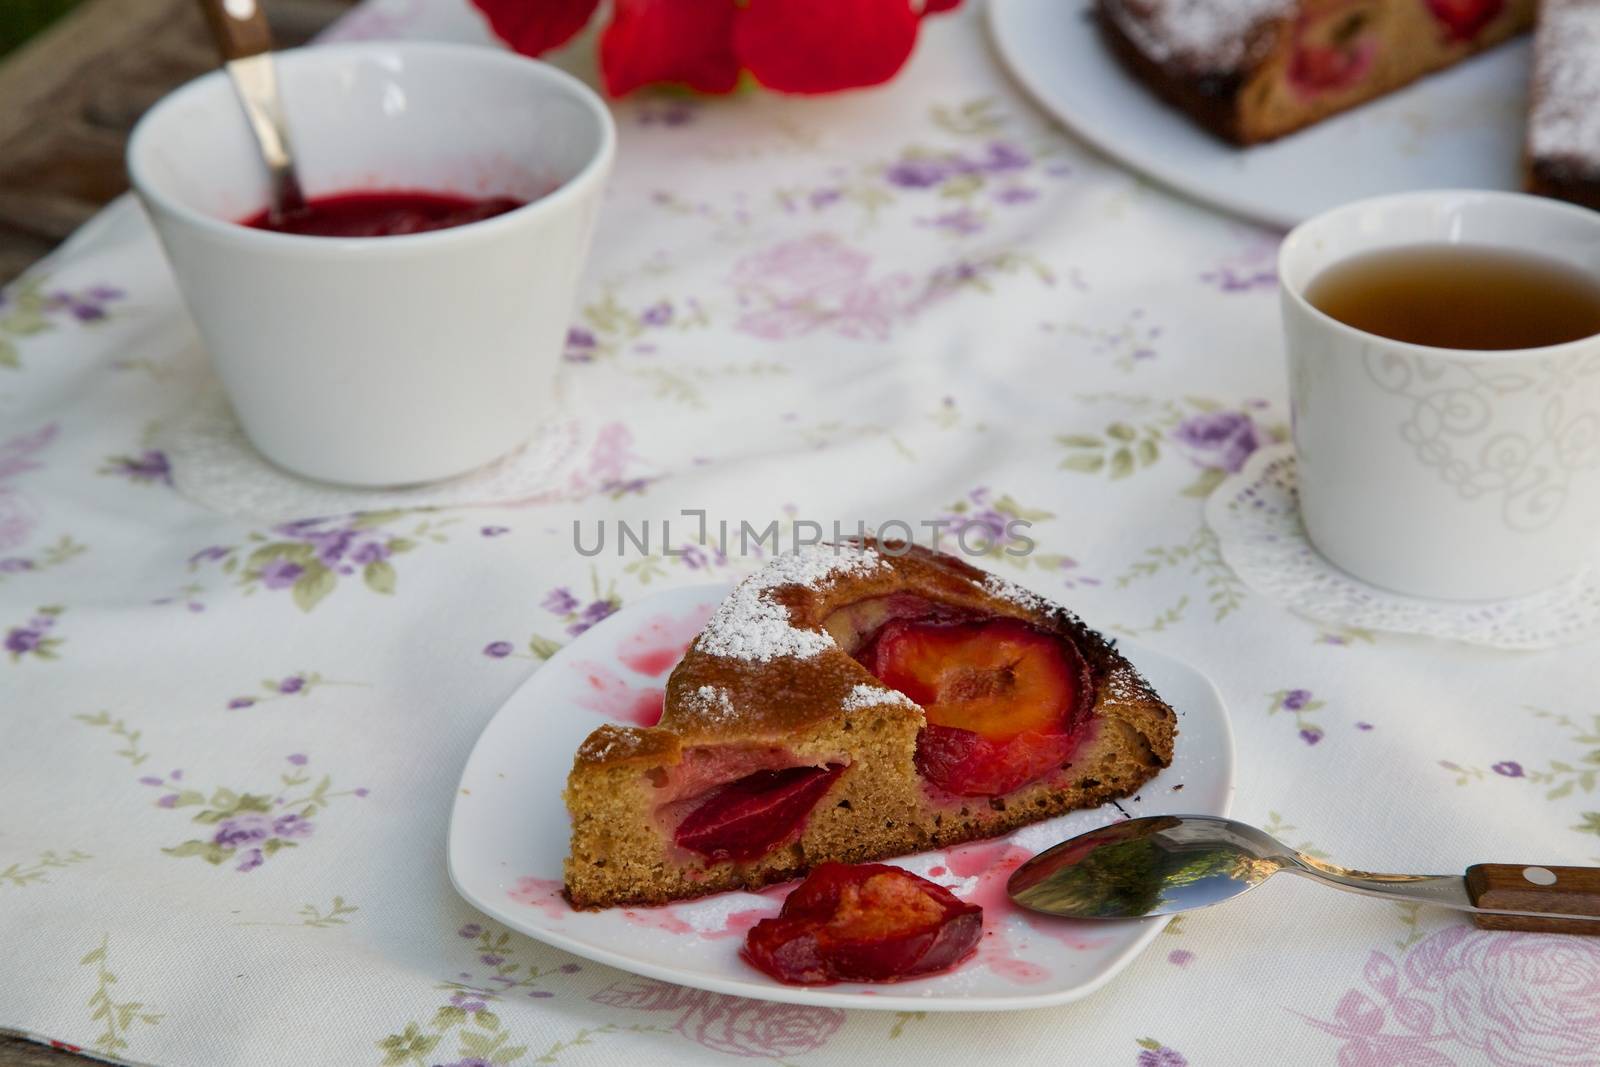 A piece of plum pie on a plate on a festive table. Plum pie, plum marmalade in a white dish and a cup of tea in the background